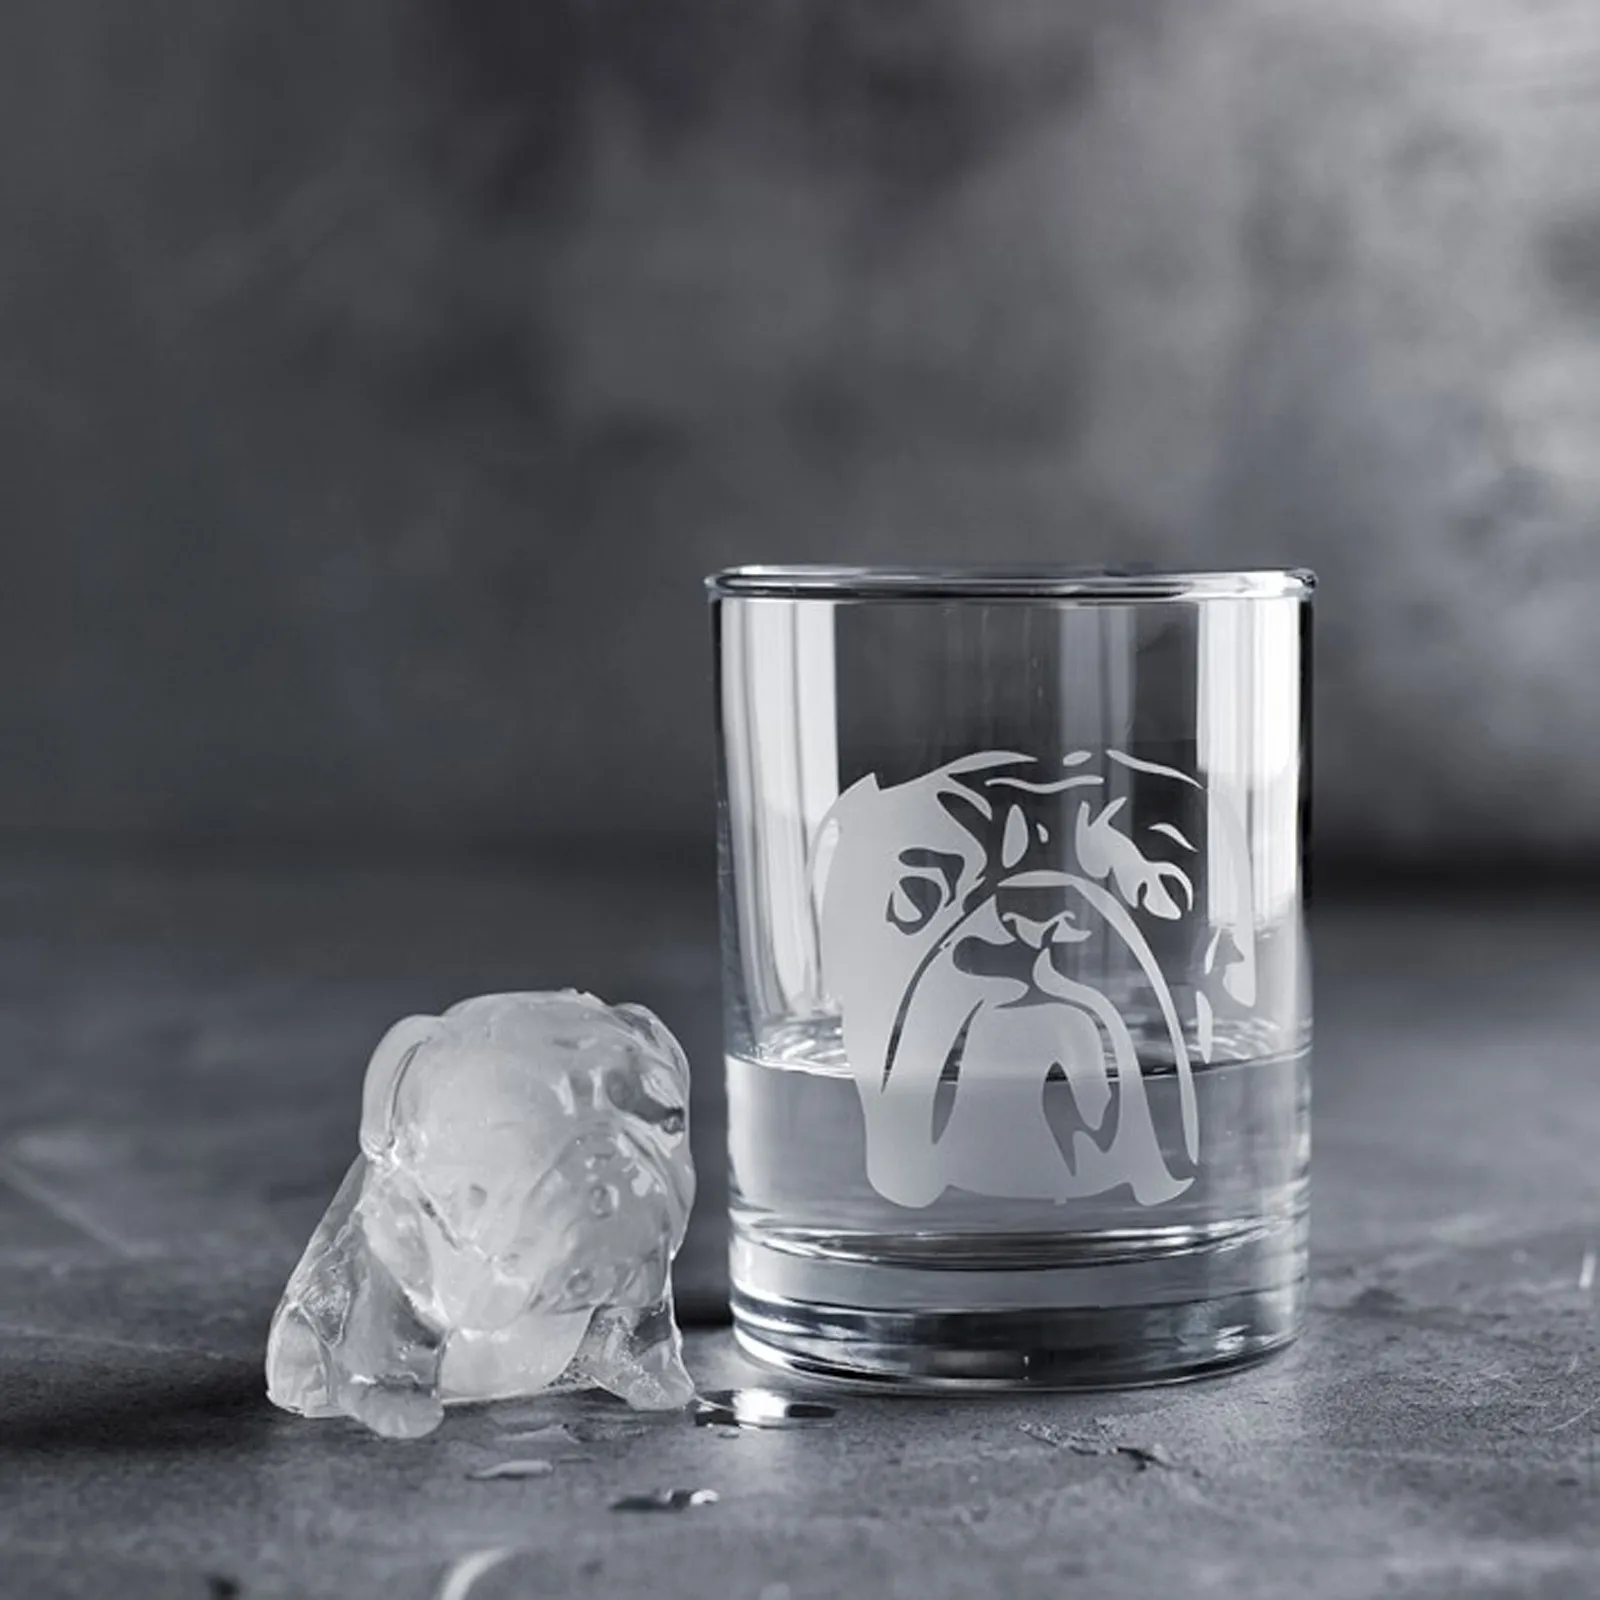 Extra Large 3D Skull Ice Cube Mold Flexible Silicone Maker 4 Cavity Tray  for Whiskey Baking, Chocolate, Candy and Re - AliExpress